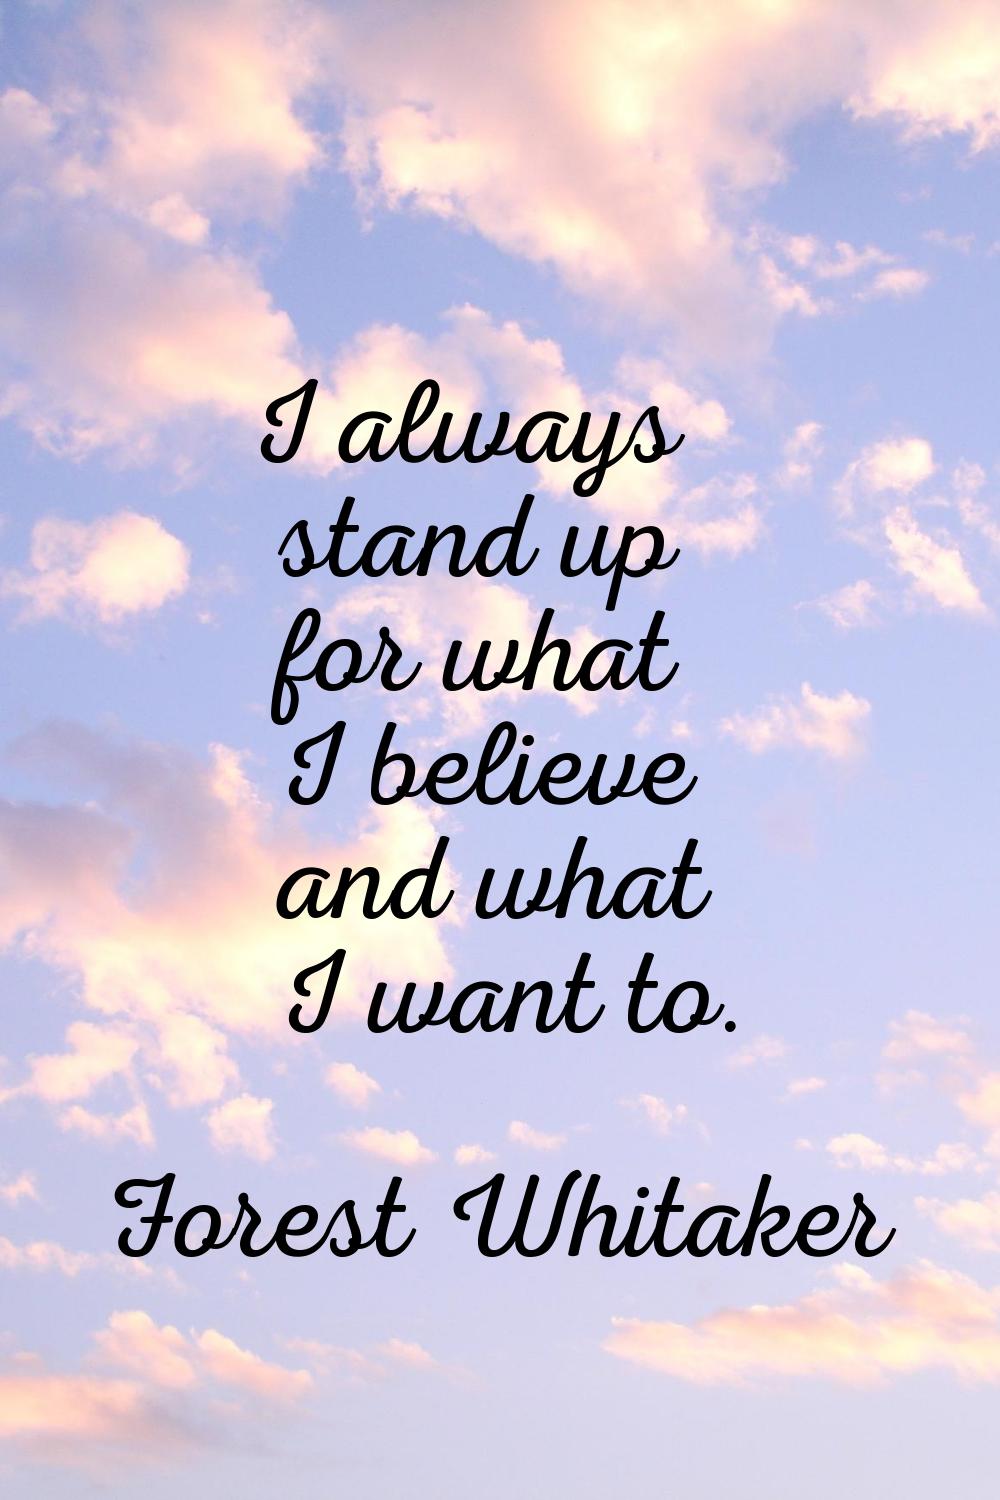 I always stand up for what I believe and what I want to.